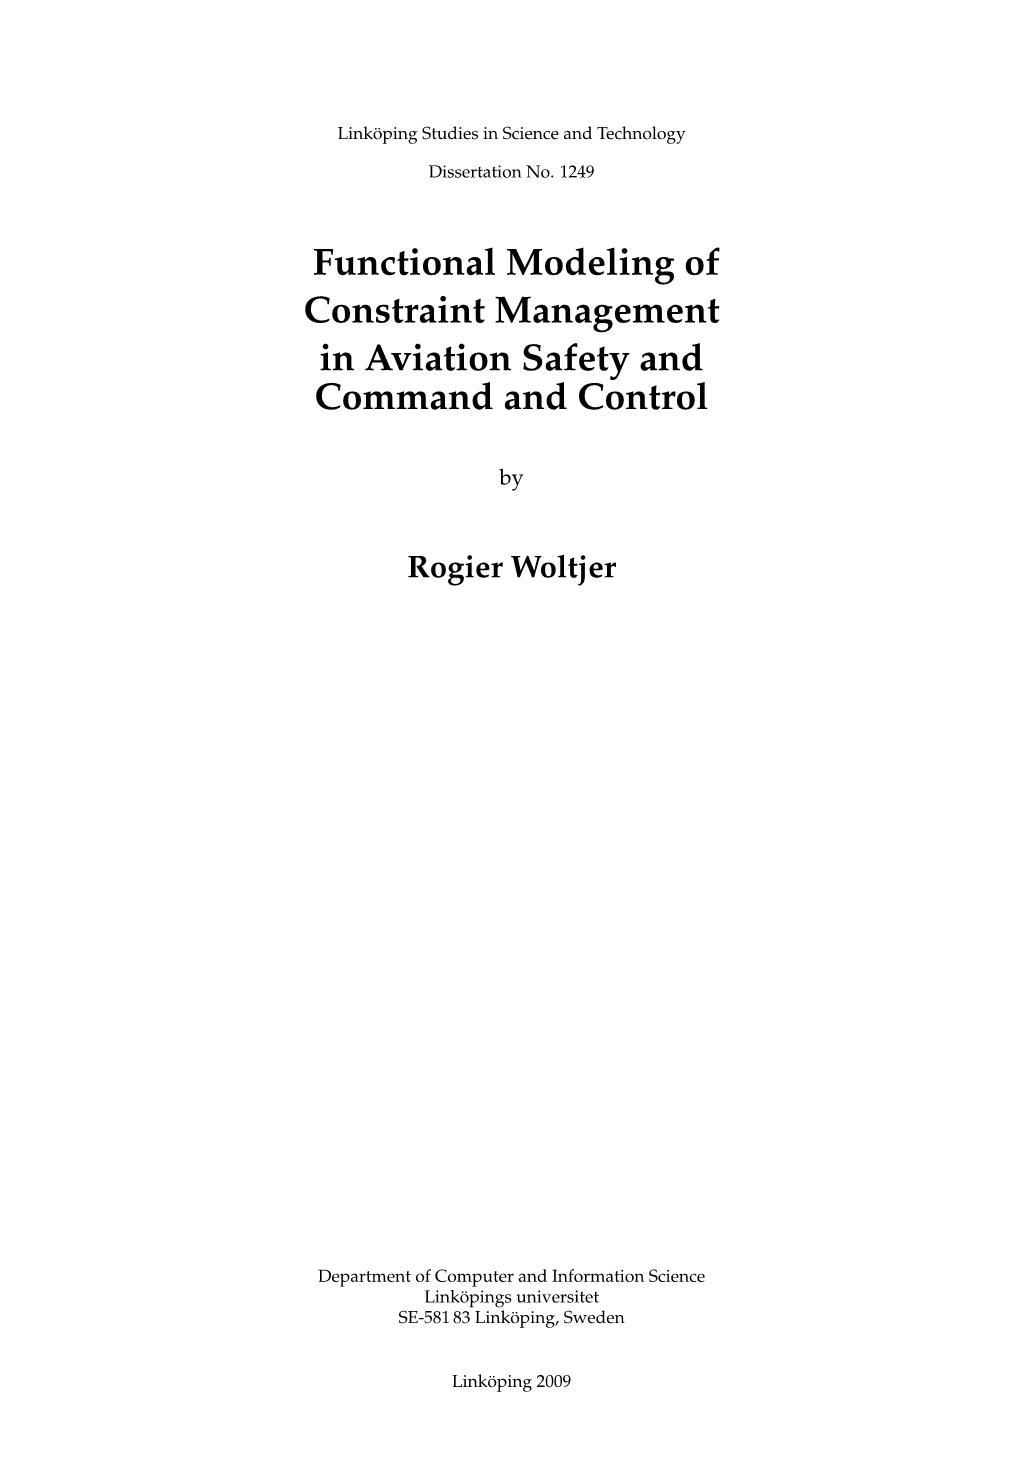 Functional Modeling of Constraint Management in Aviation Safety and Command and Control